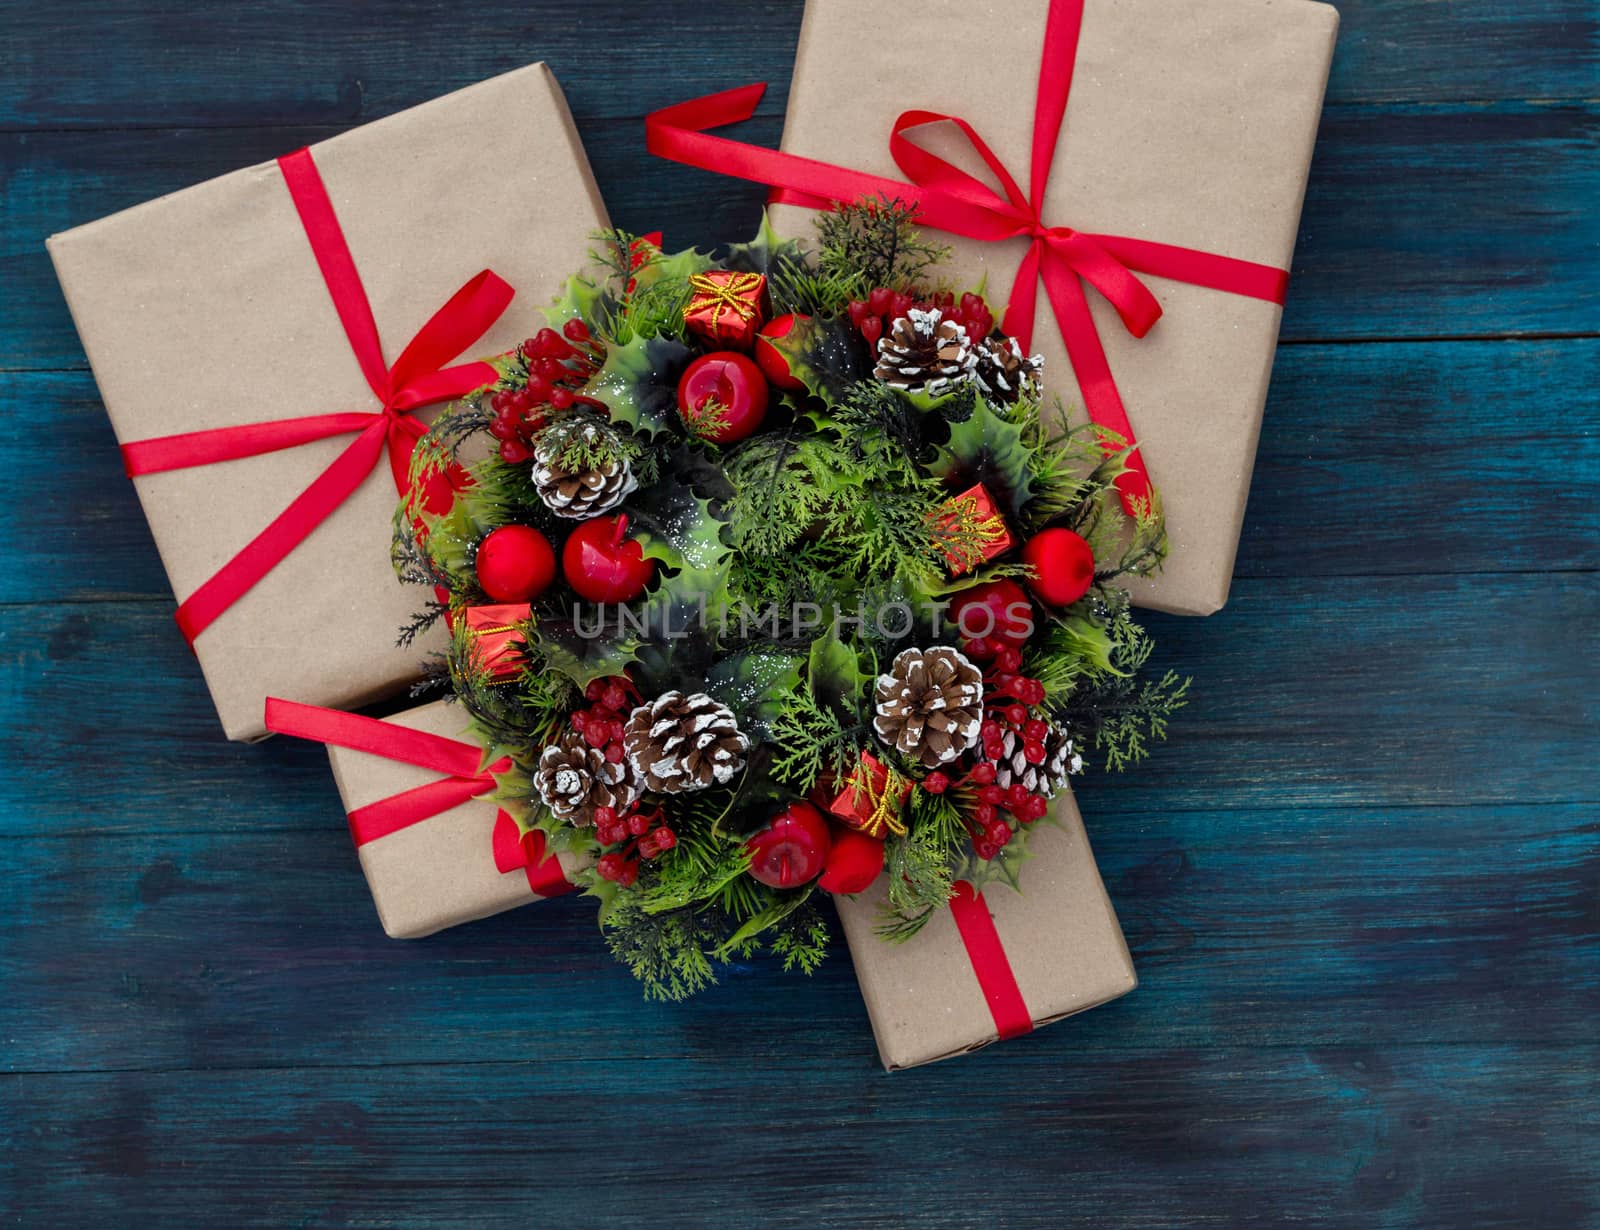 .Christmas background with gifts tied with a red ribbon and decorative wreath. by galinasharapova